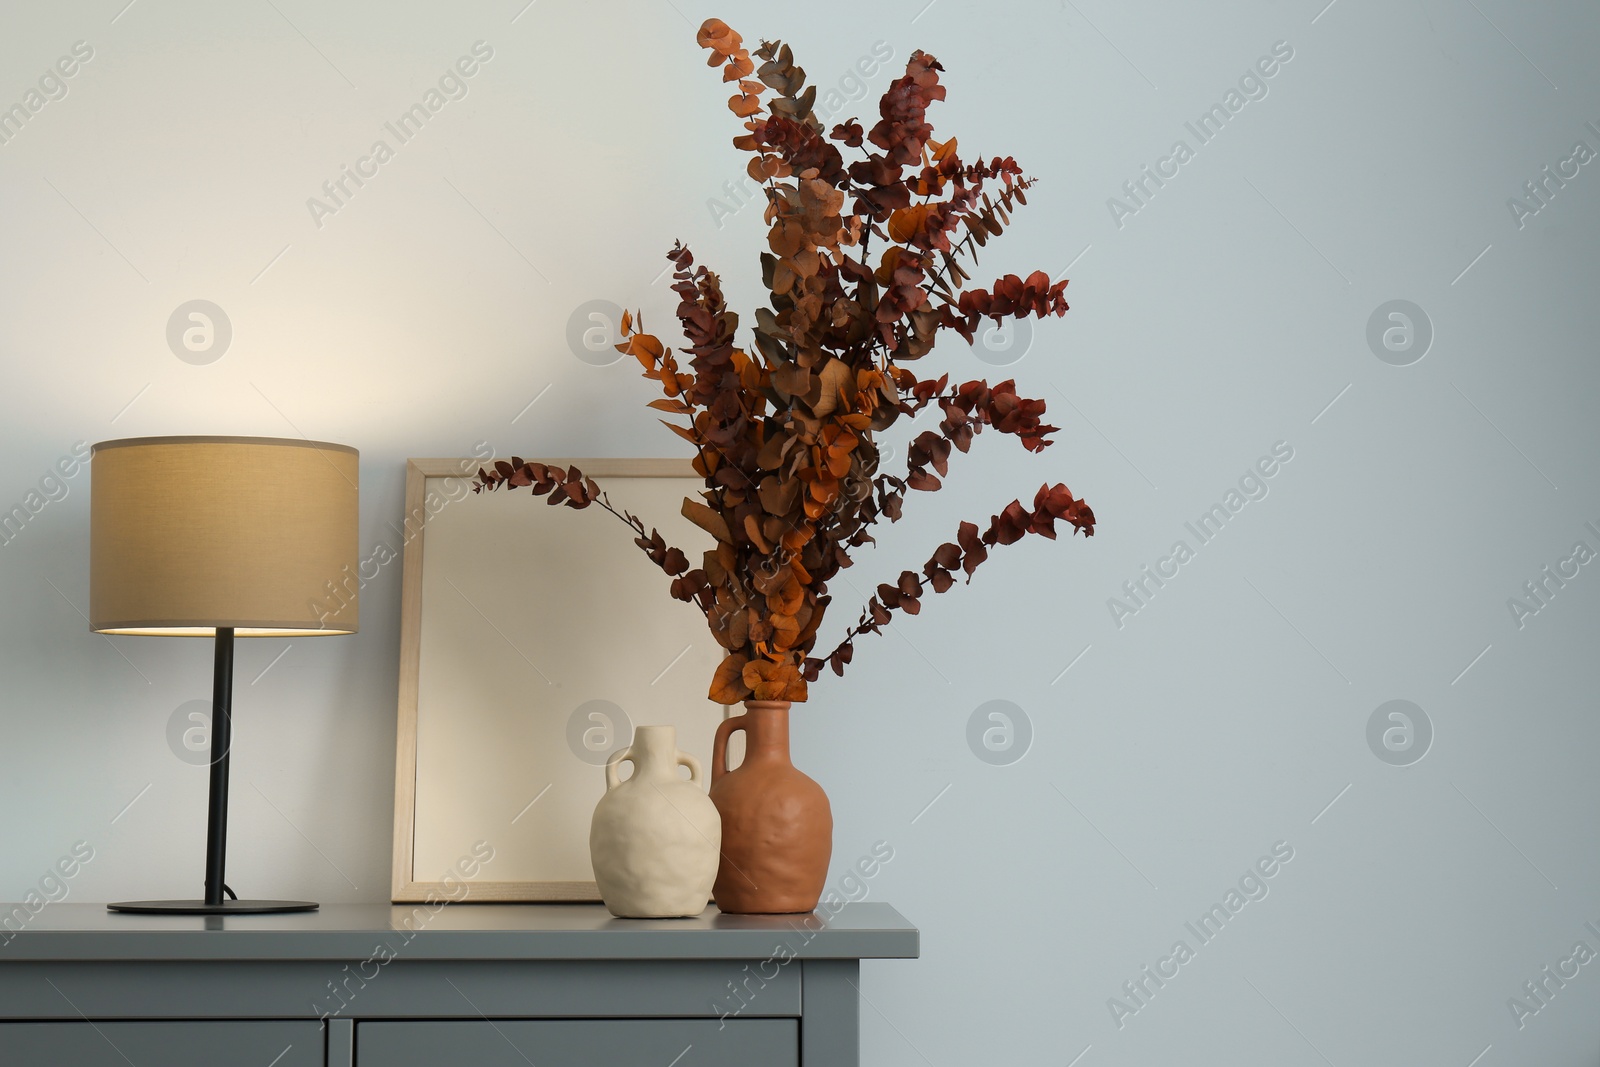 Photo of Stylish vases, dried eucalyptus branches and table lamp on chest of drawers near white wall indoors, space for text. Interior design